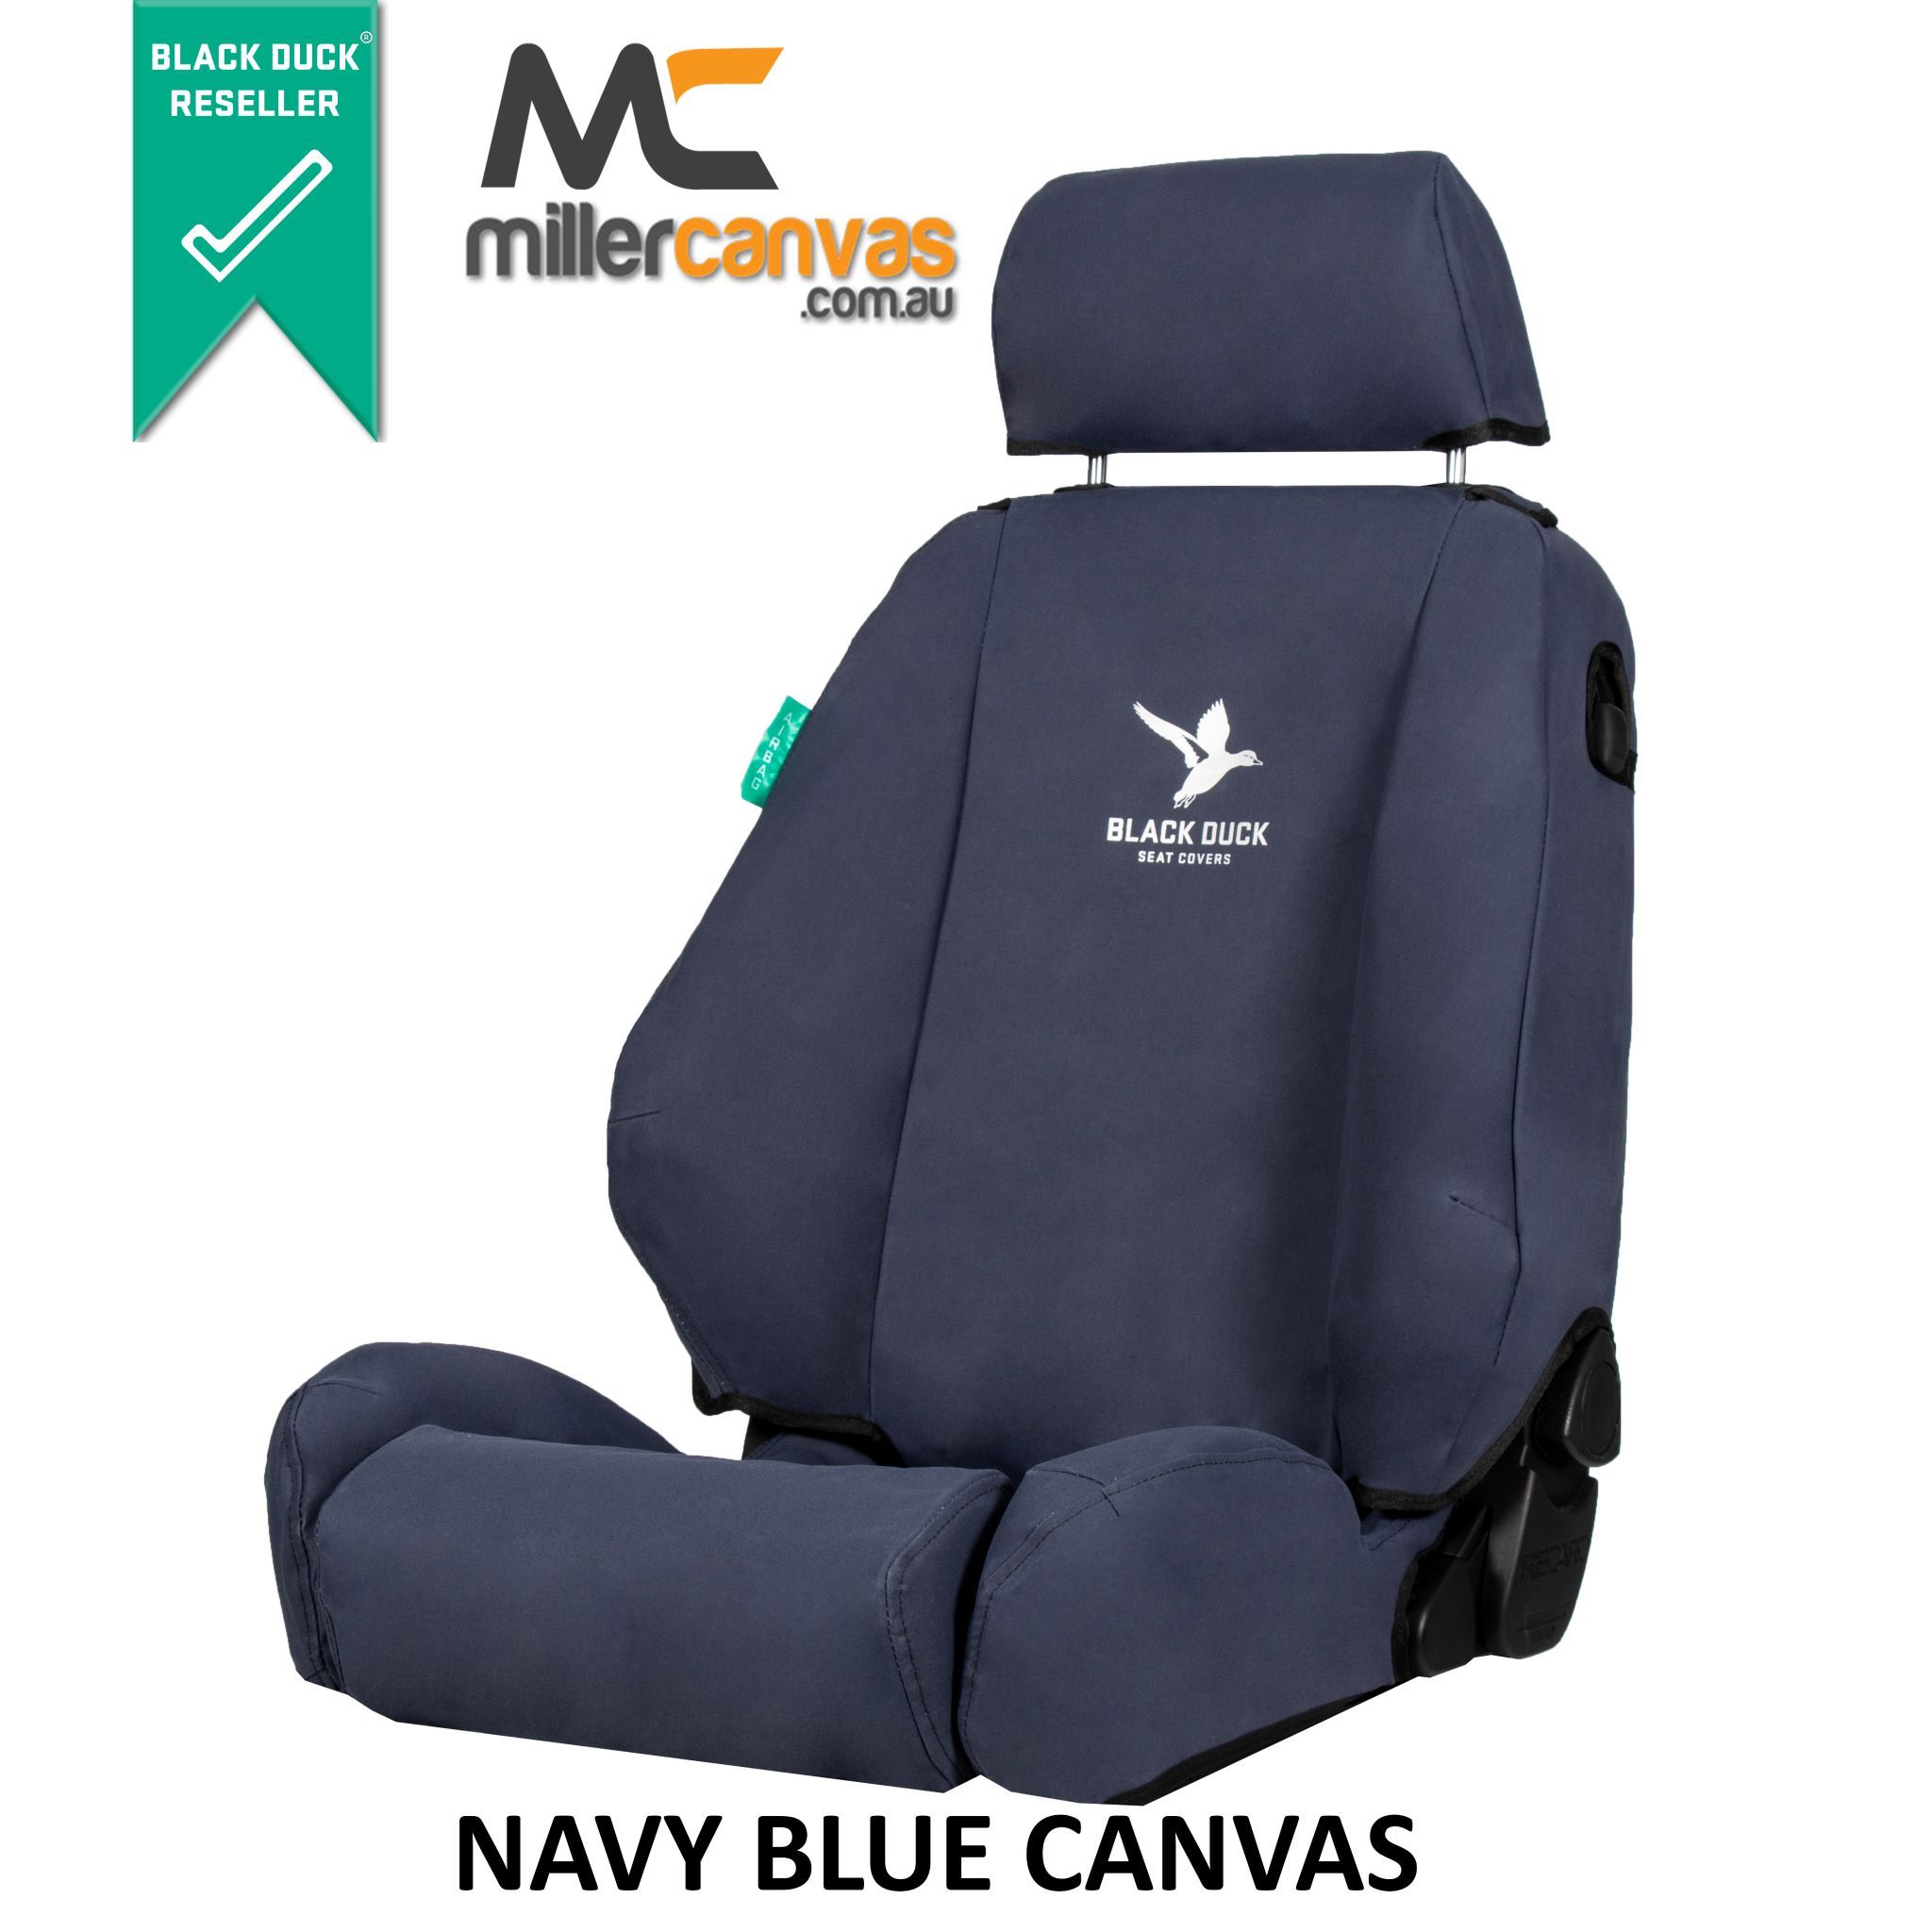 Discover more than 180 blue denim seat covers latest